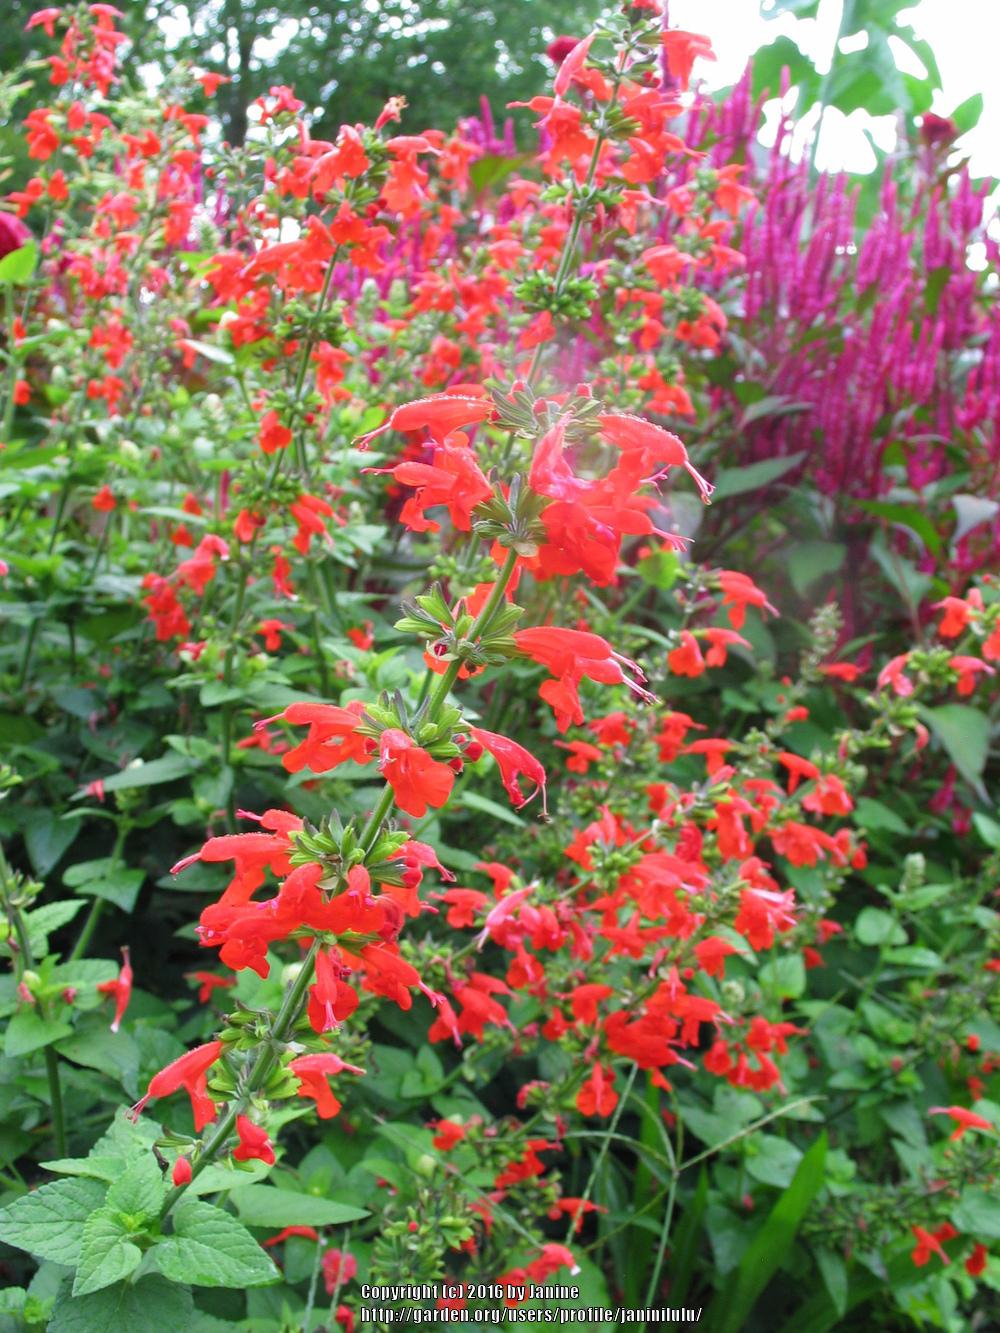 Photo of Scarlet Sage (Salvia coccinea 'Lady in Red') uploaded by janinilulu